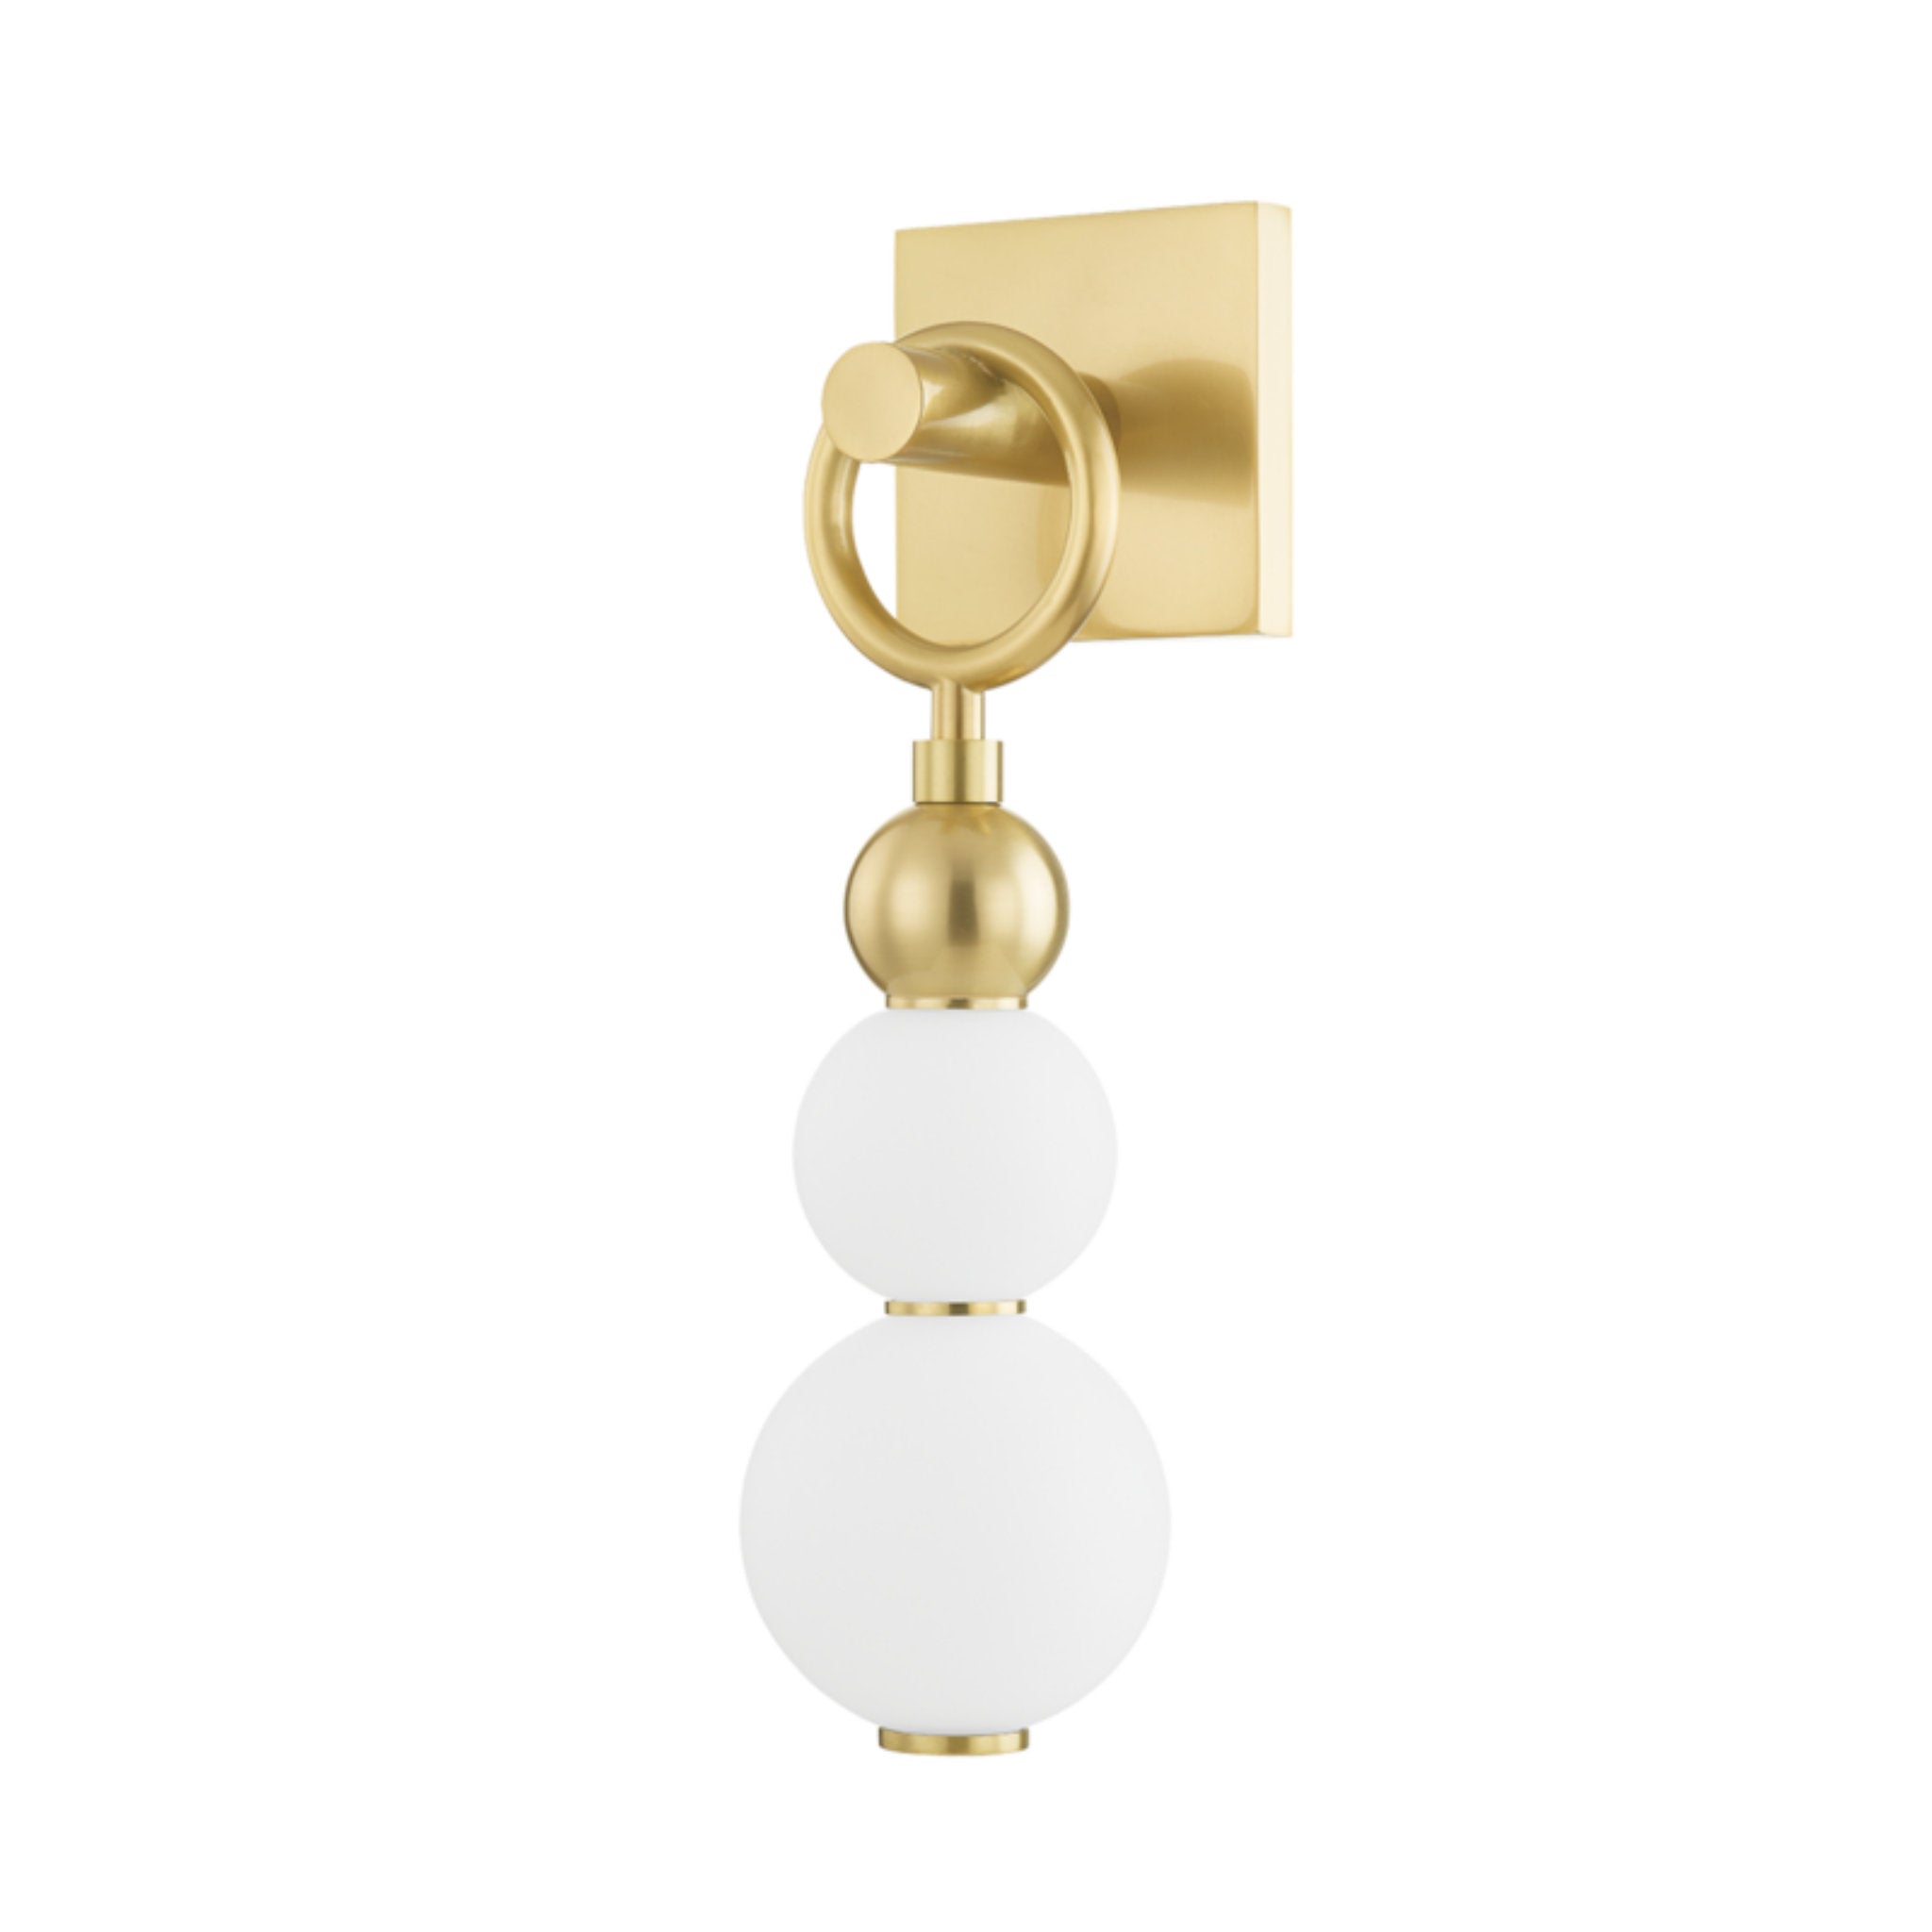 Perrin 1 Light Wall Sconce in Aged Brass by Pembrooke & Ives